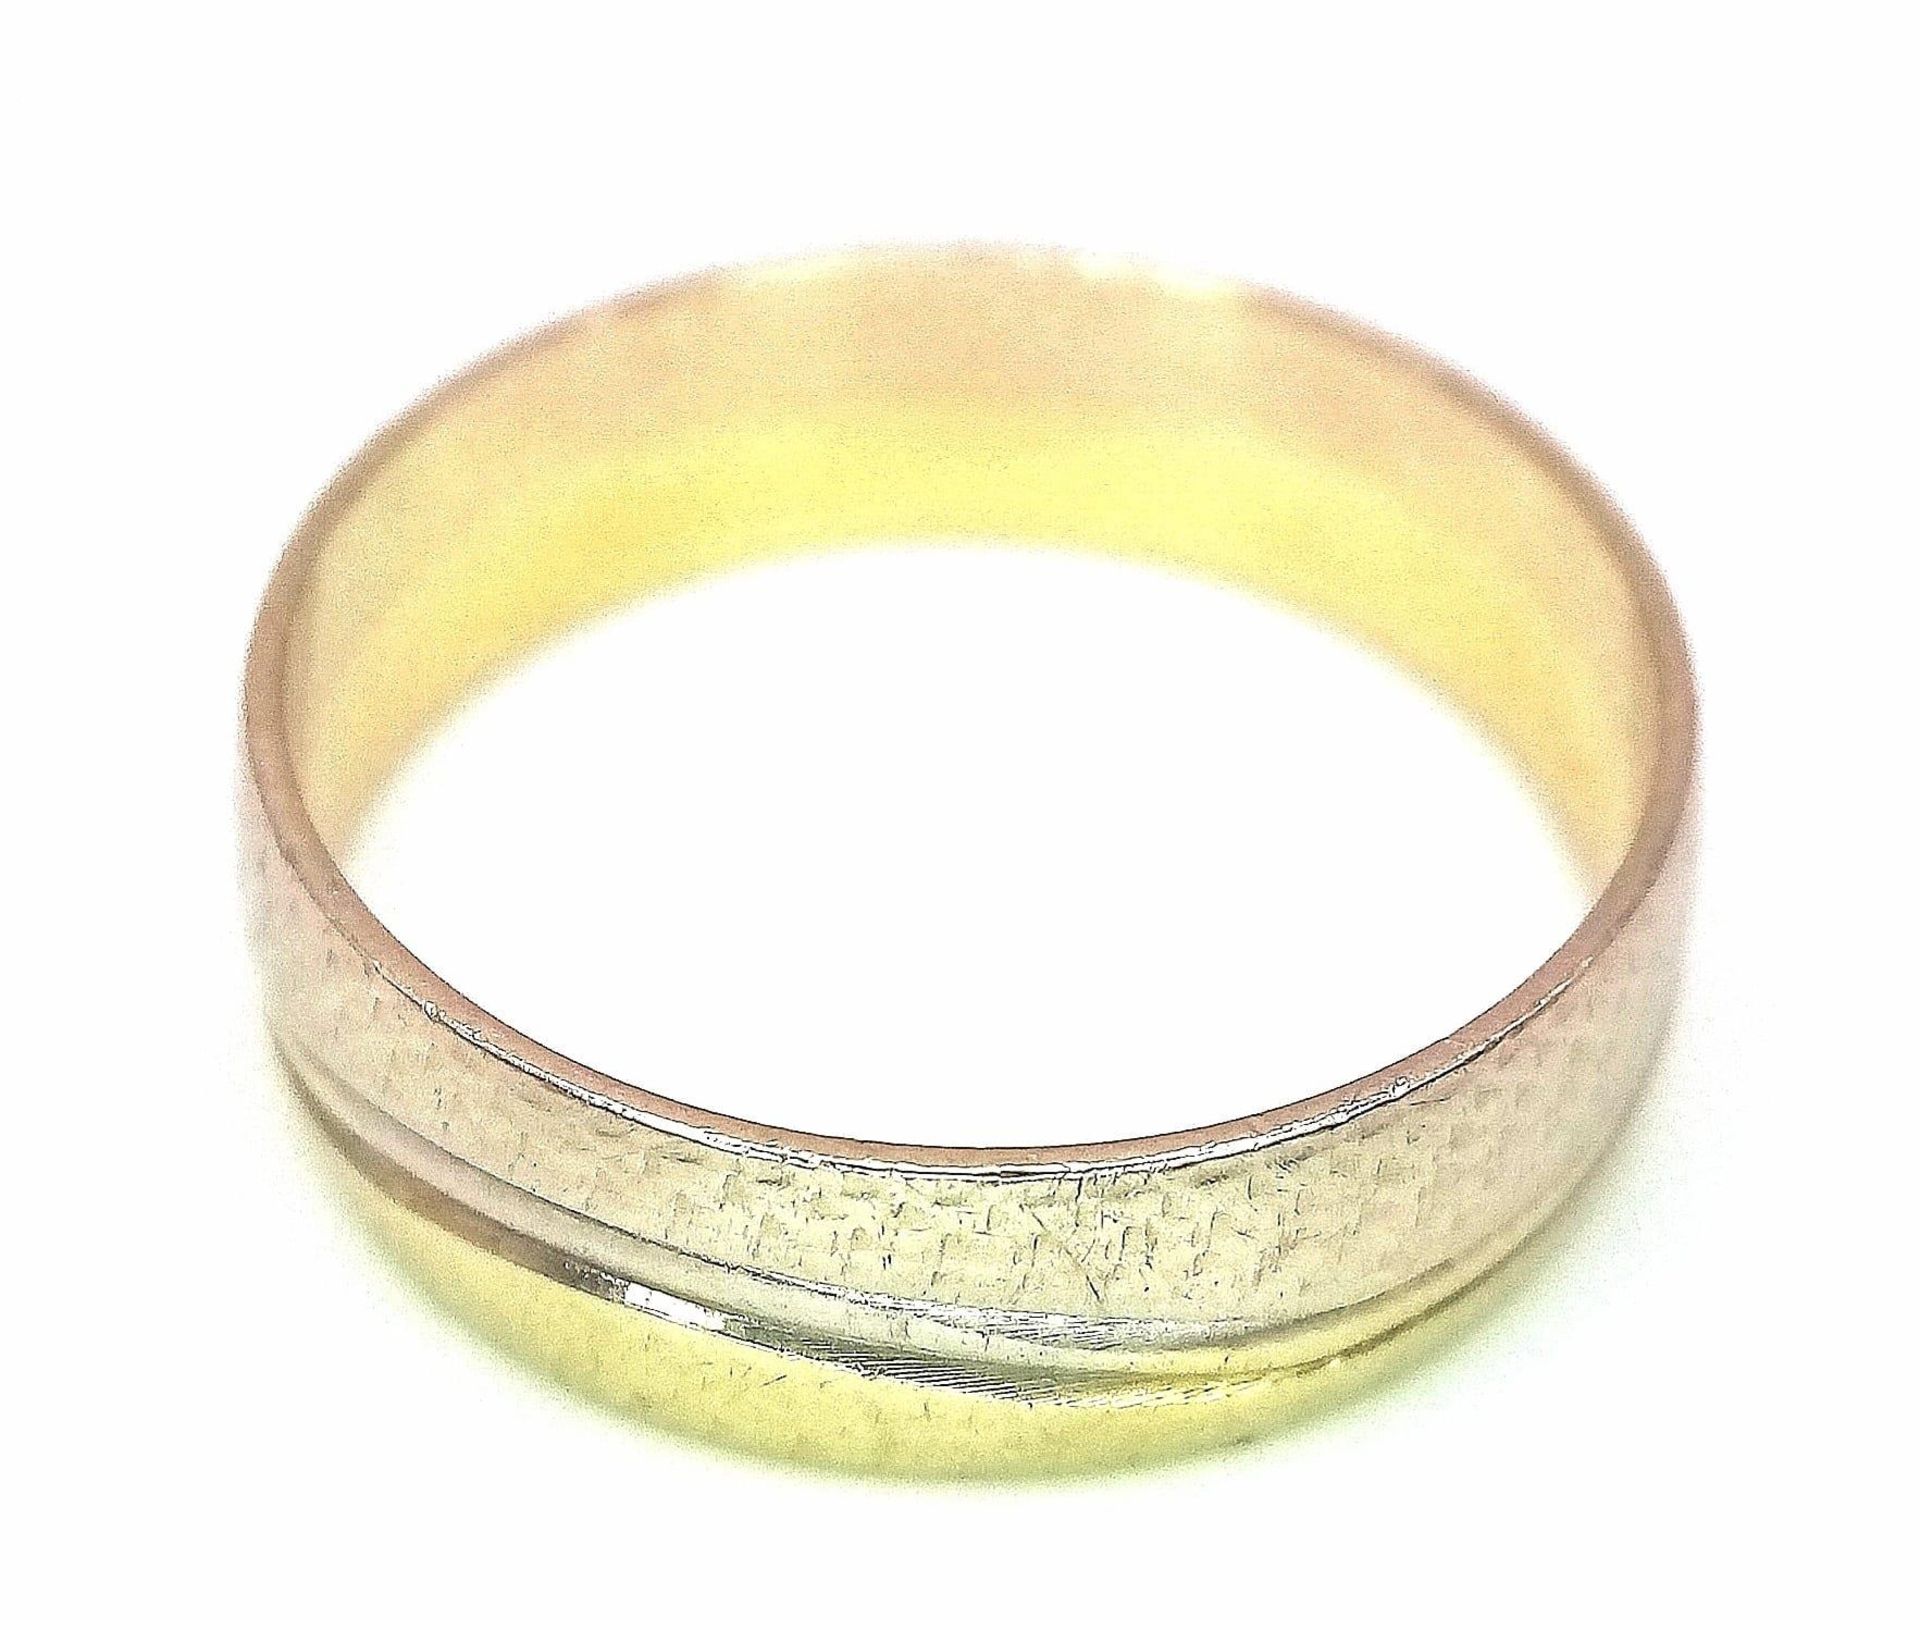 A 14K Yellow Gold Band Ring with Swirl Decoration. Size O. 2.9g weight. - Bild 4 aus 5